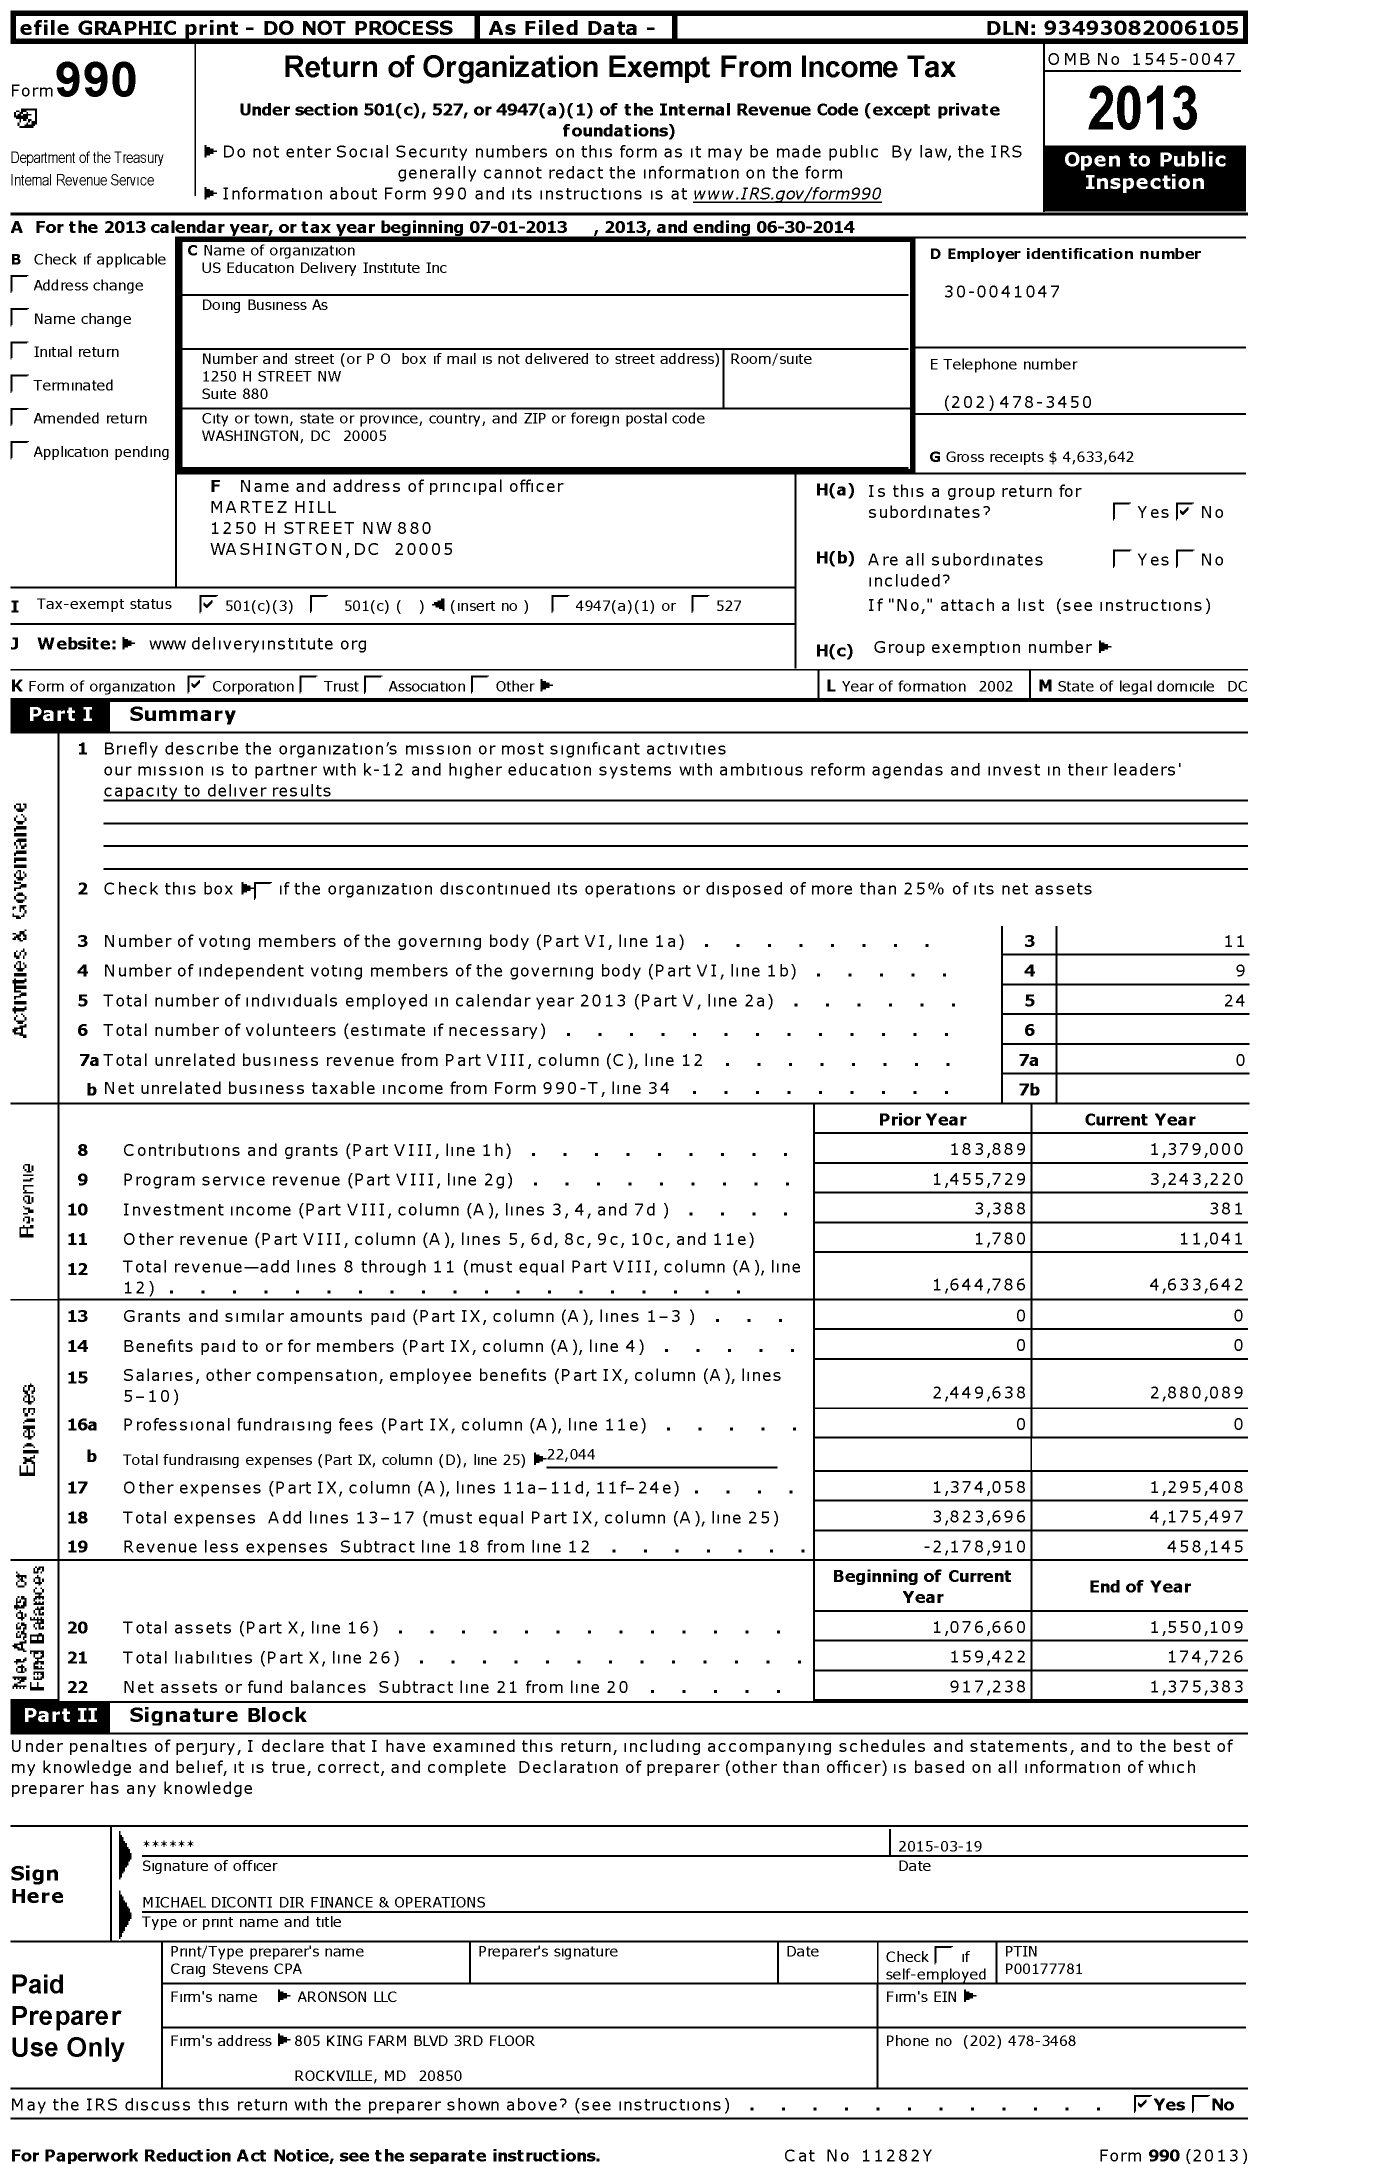 Image of first page of 2013 Form 990 for Education Delivery Institute (EDI)